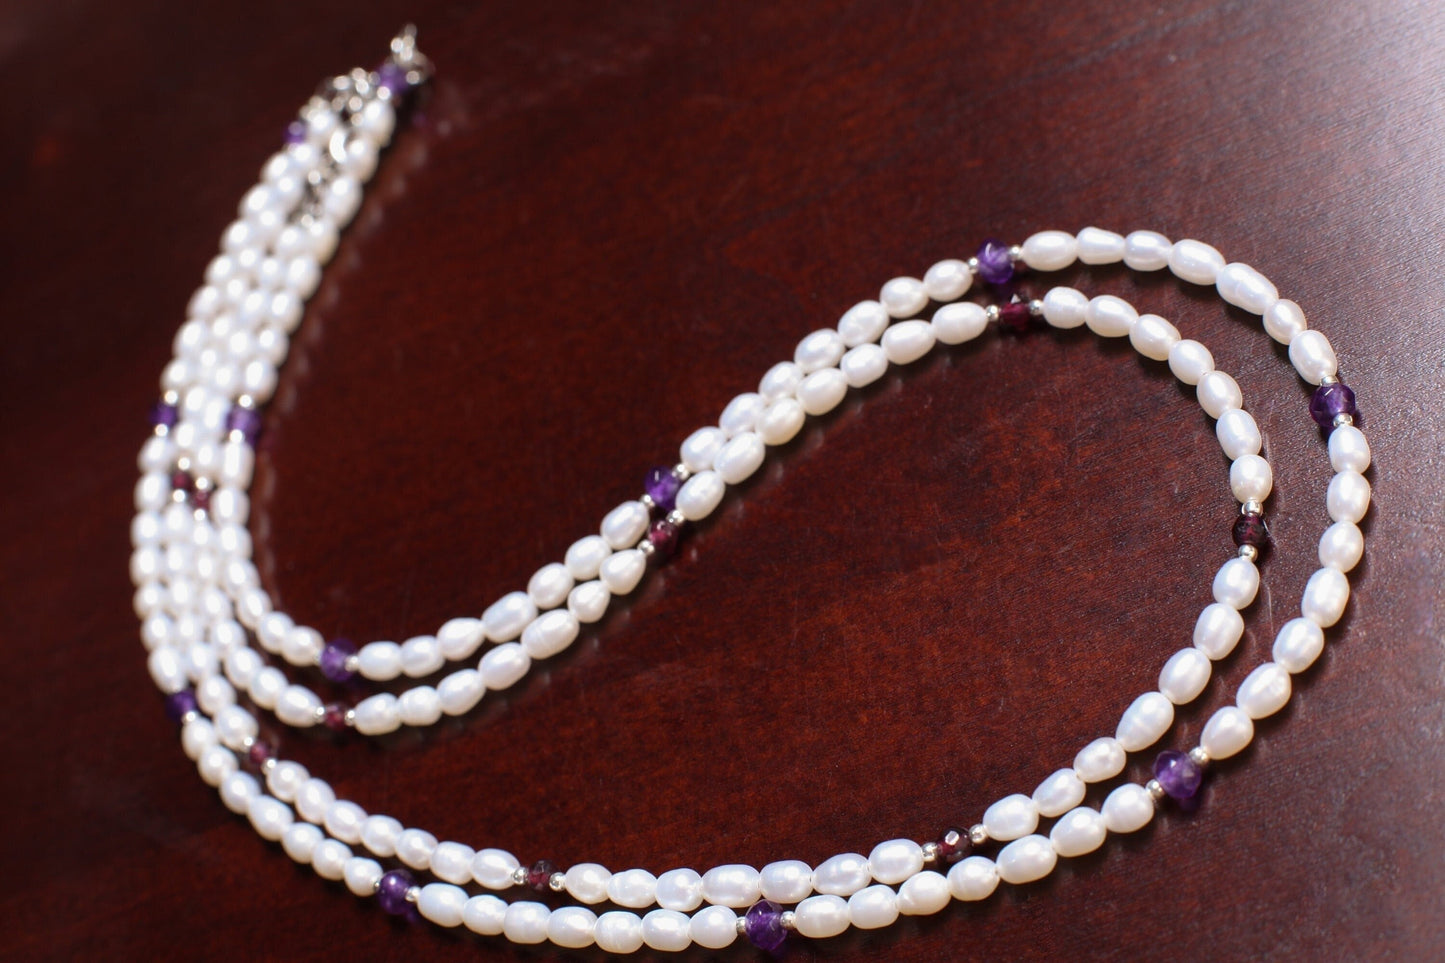 Freshwater Pearl with Genuine Amethyst or Garnet, 925 Sterling Silver spacer and Clasp Necklace, Choker, Layering, Minimalist Holiday Gift